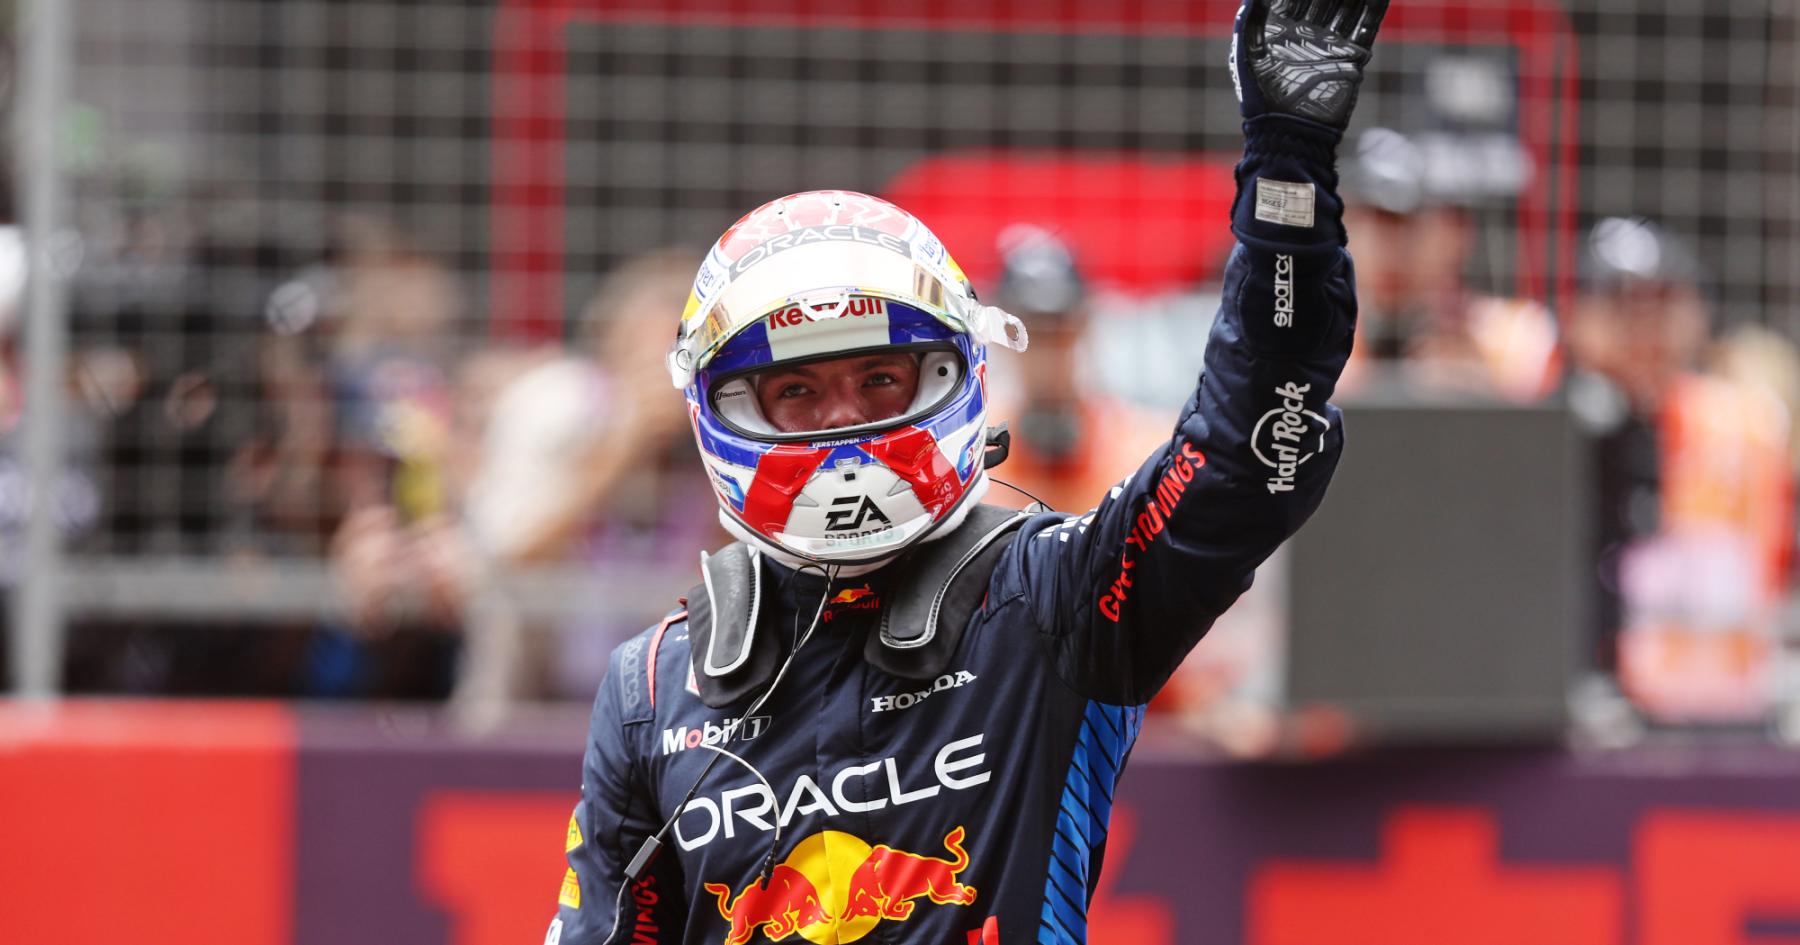 Verstappen Triumphs Through Adversity: A Gritty Victory in China